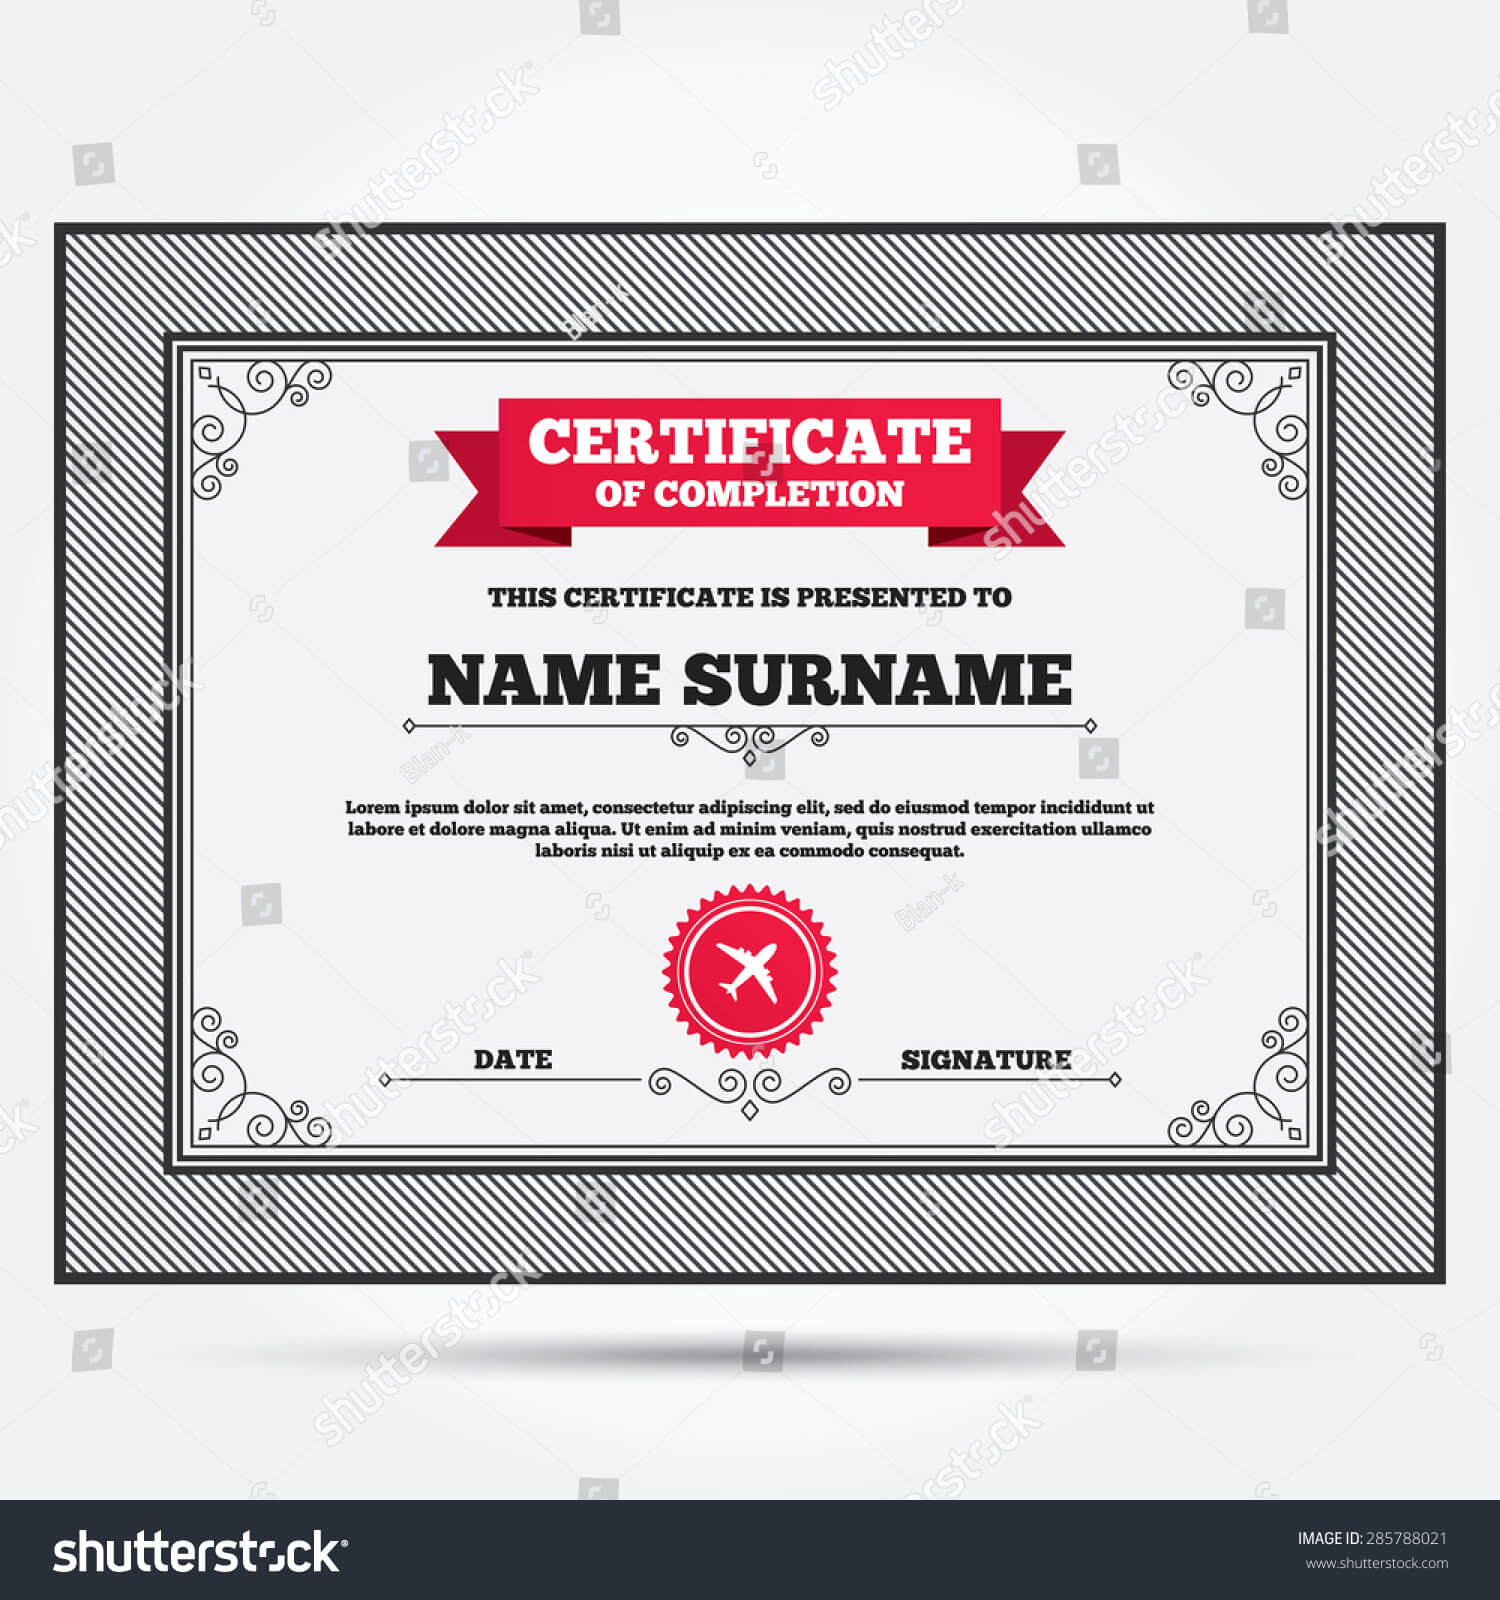 Certificates Of Completion Template ] – Certificate Of Regarding Sales Certificate Template